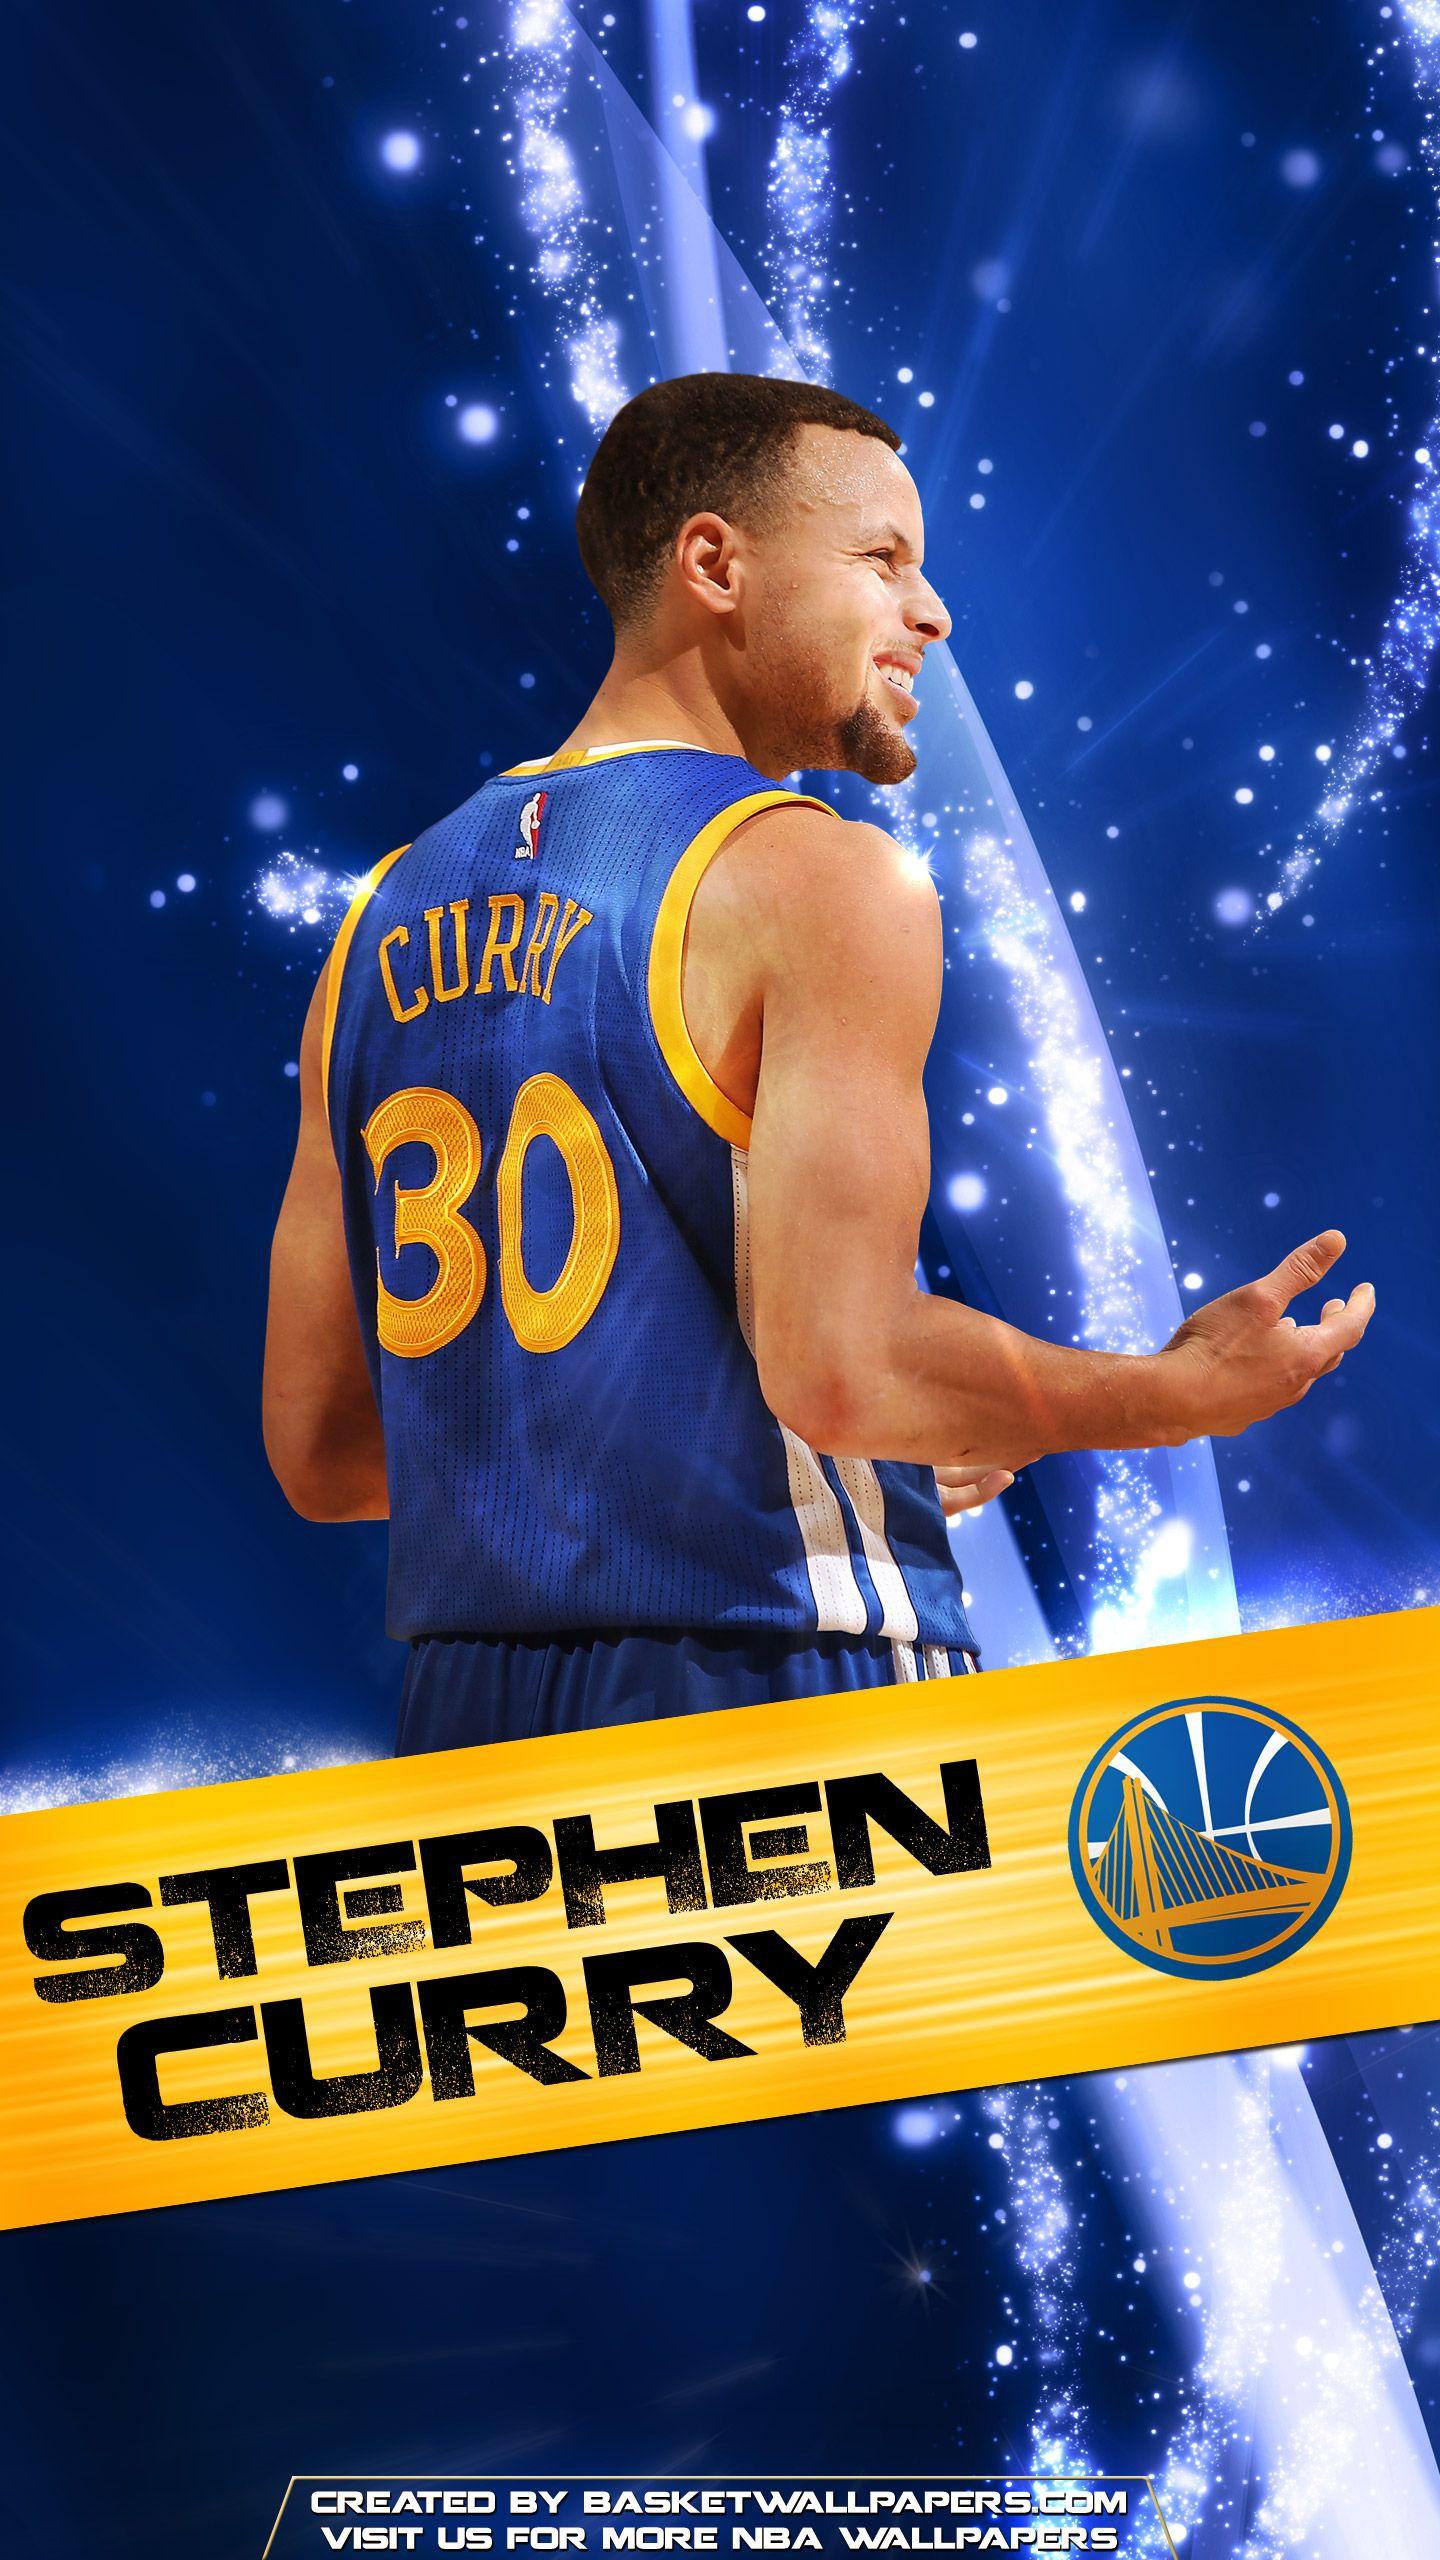 Stephen Curry Wallpaper for iPhone Live Wallpaper HD. Stephen curry wallpaper, Curry wallpaper, Golden state warriors wallpaper